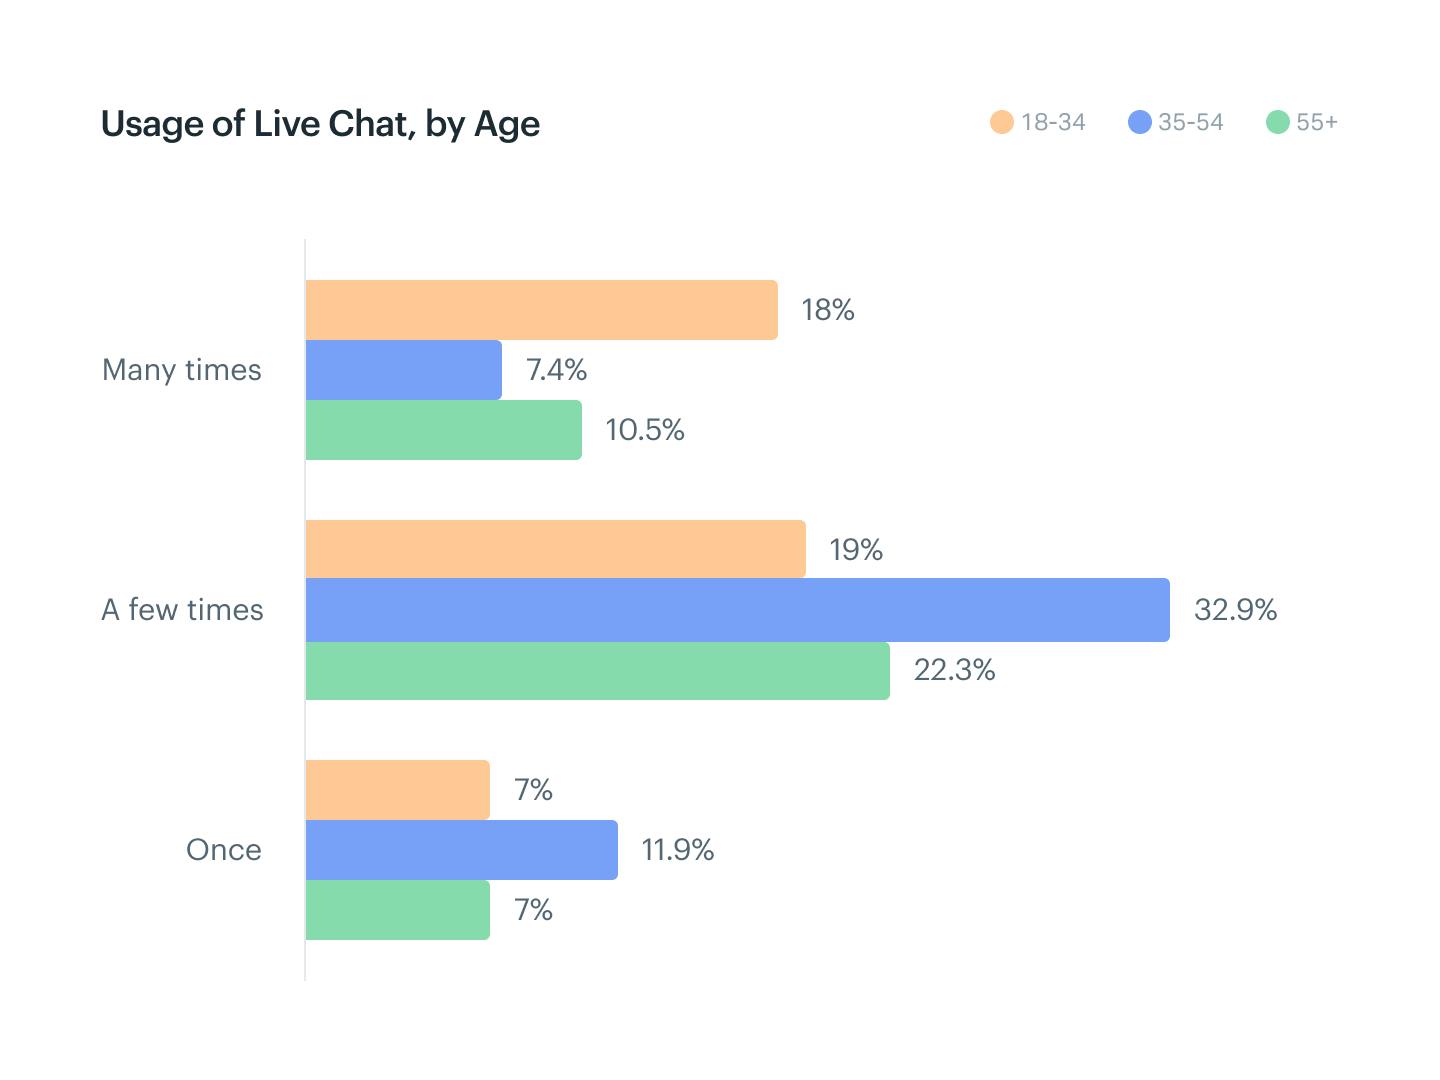 7.4% of people in age groups 35 through 54, and 10.5% of people aged 55 plus, report having used live chat for support many times